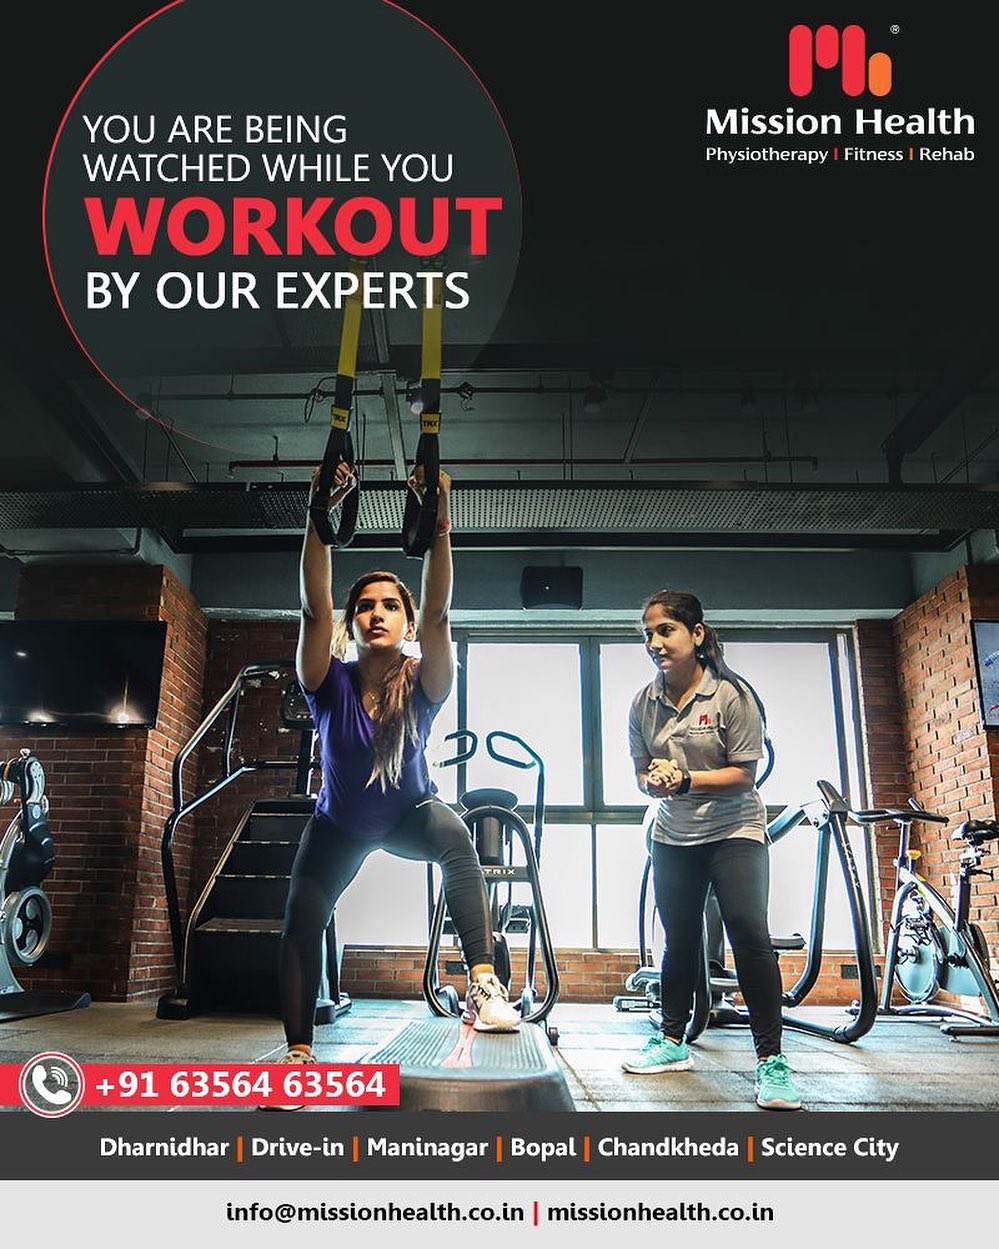 Ahmedabad’s first Fitness Boutique where expert sports physiotherapists and fitness coaches come together to form new rules of Fitness.

#fitnessfreak #fitness #fitnessfirst #sportsfitness #bodybuilding #Bodyworkouts #bodyshaping #workouts #sportsworkouts #preworkoutsessions